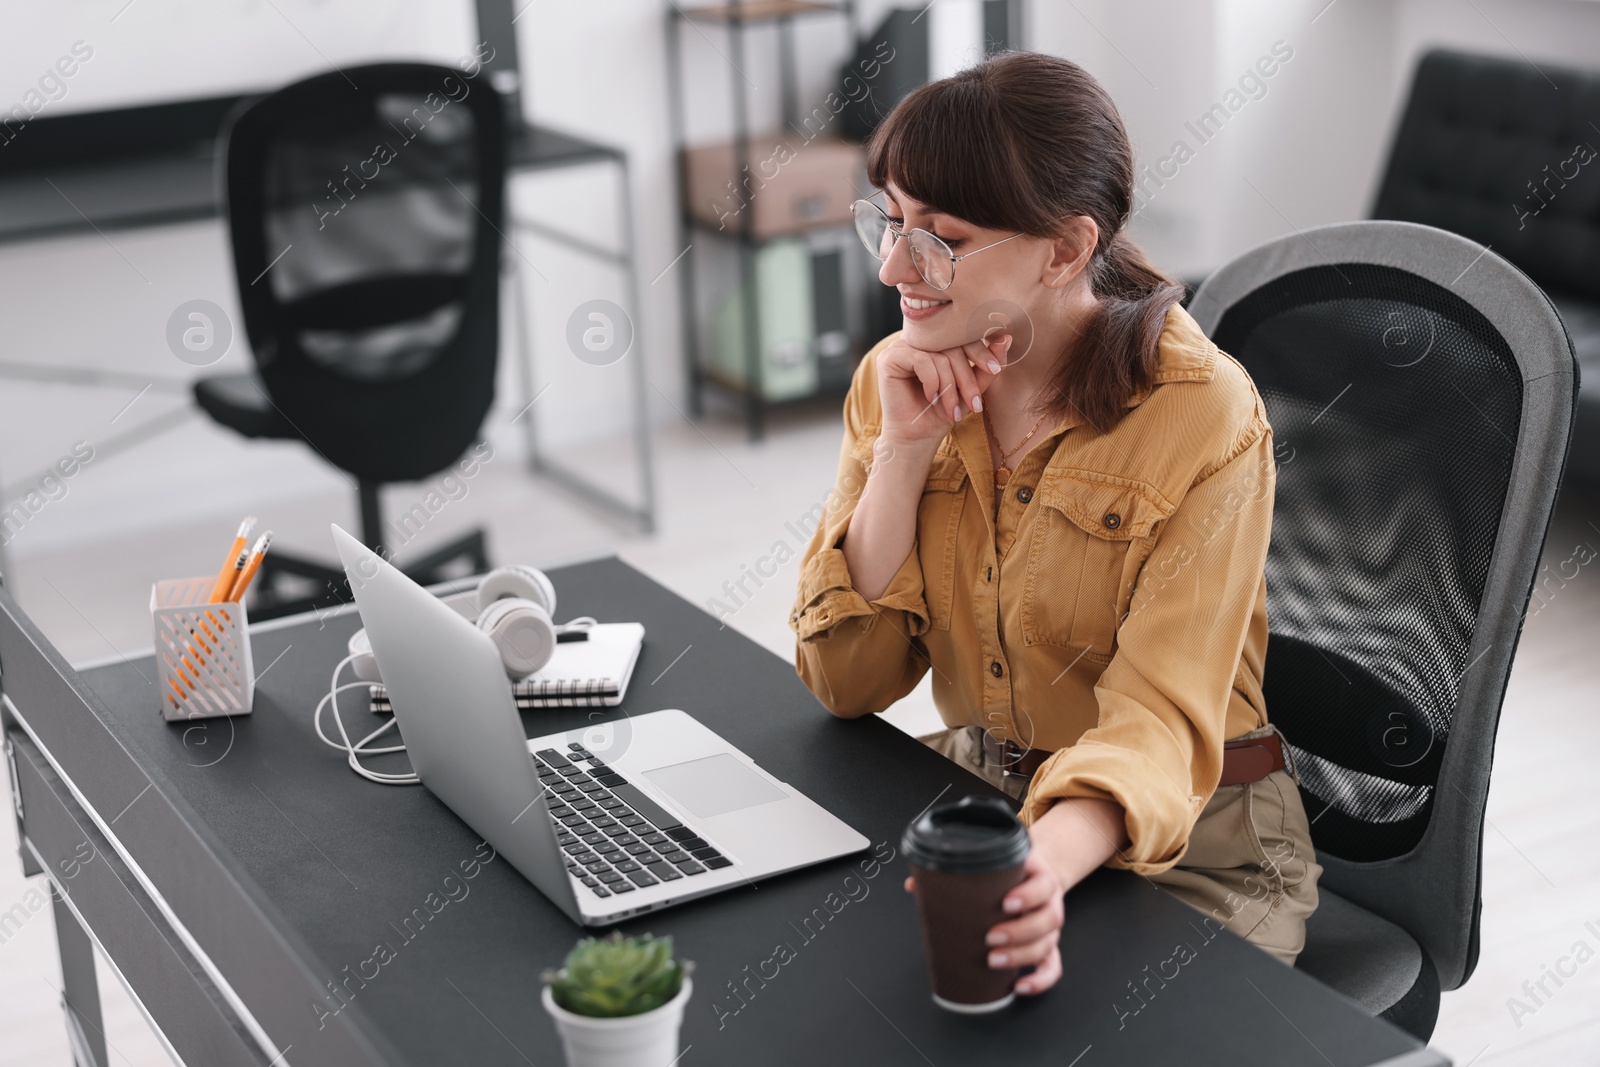 Photo of Woman with cup of coffee watching webinar at table in office